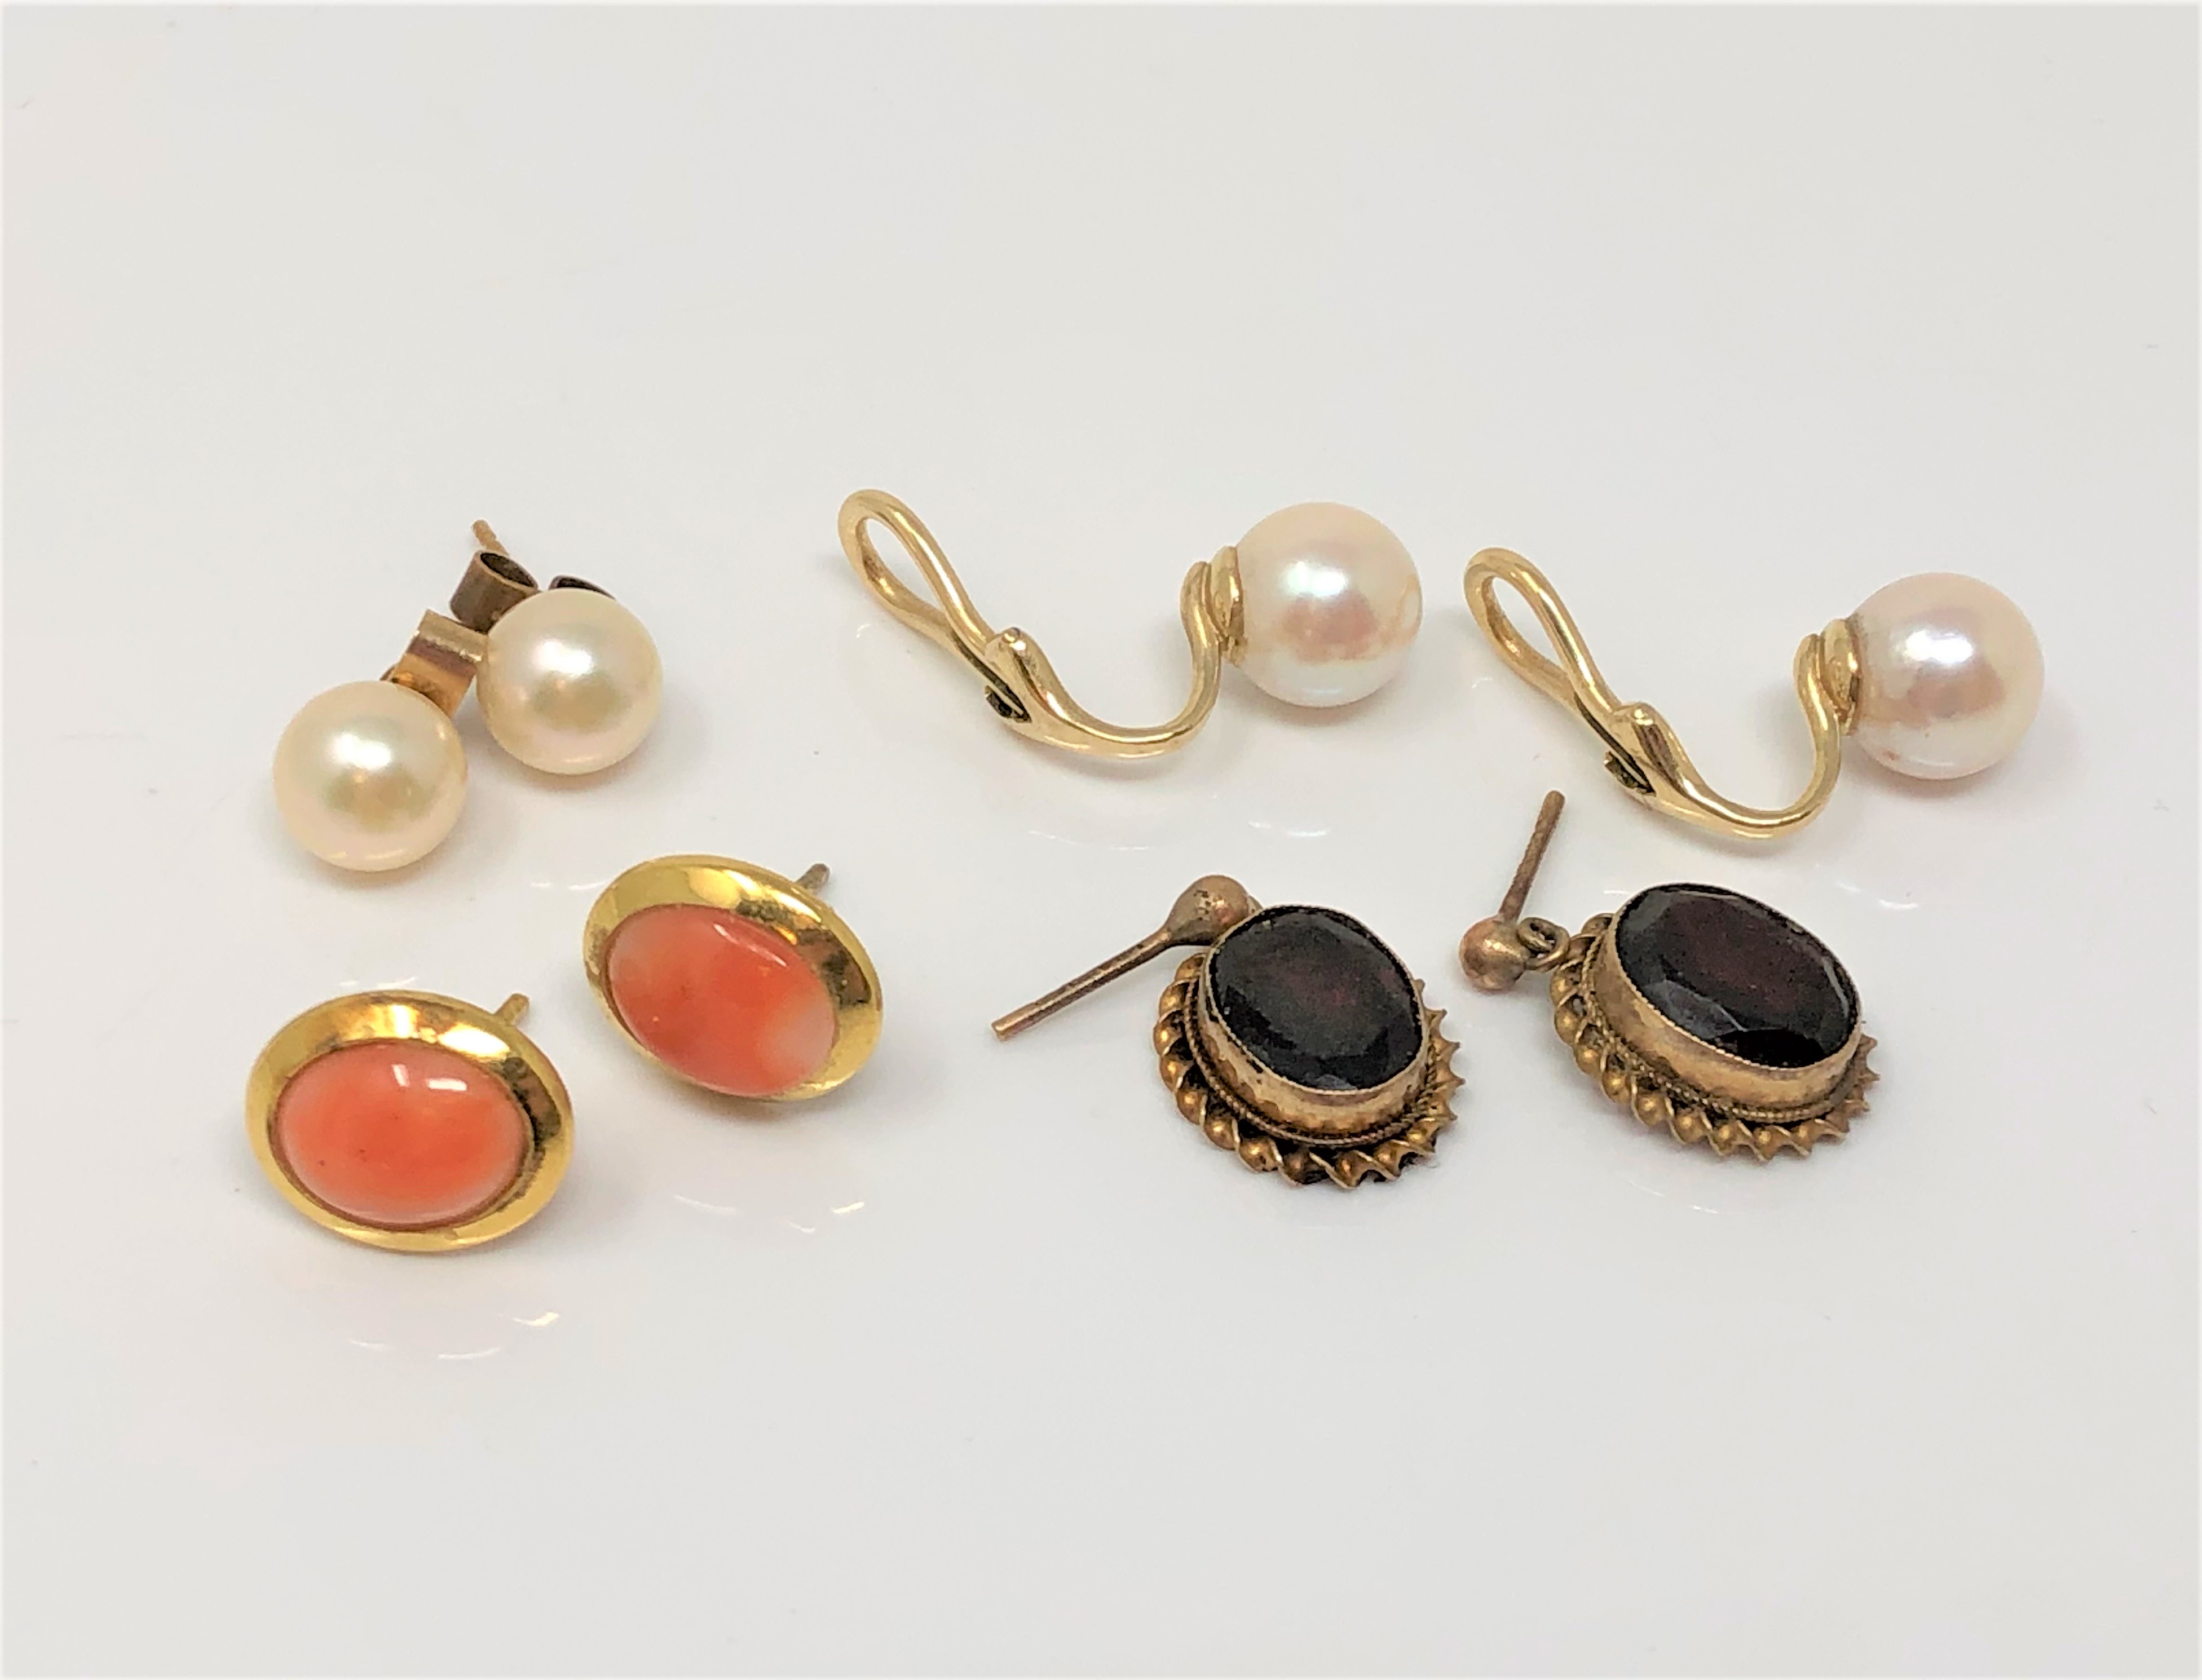 Four pairs of gold earrings set with pearls, coral and garnets.